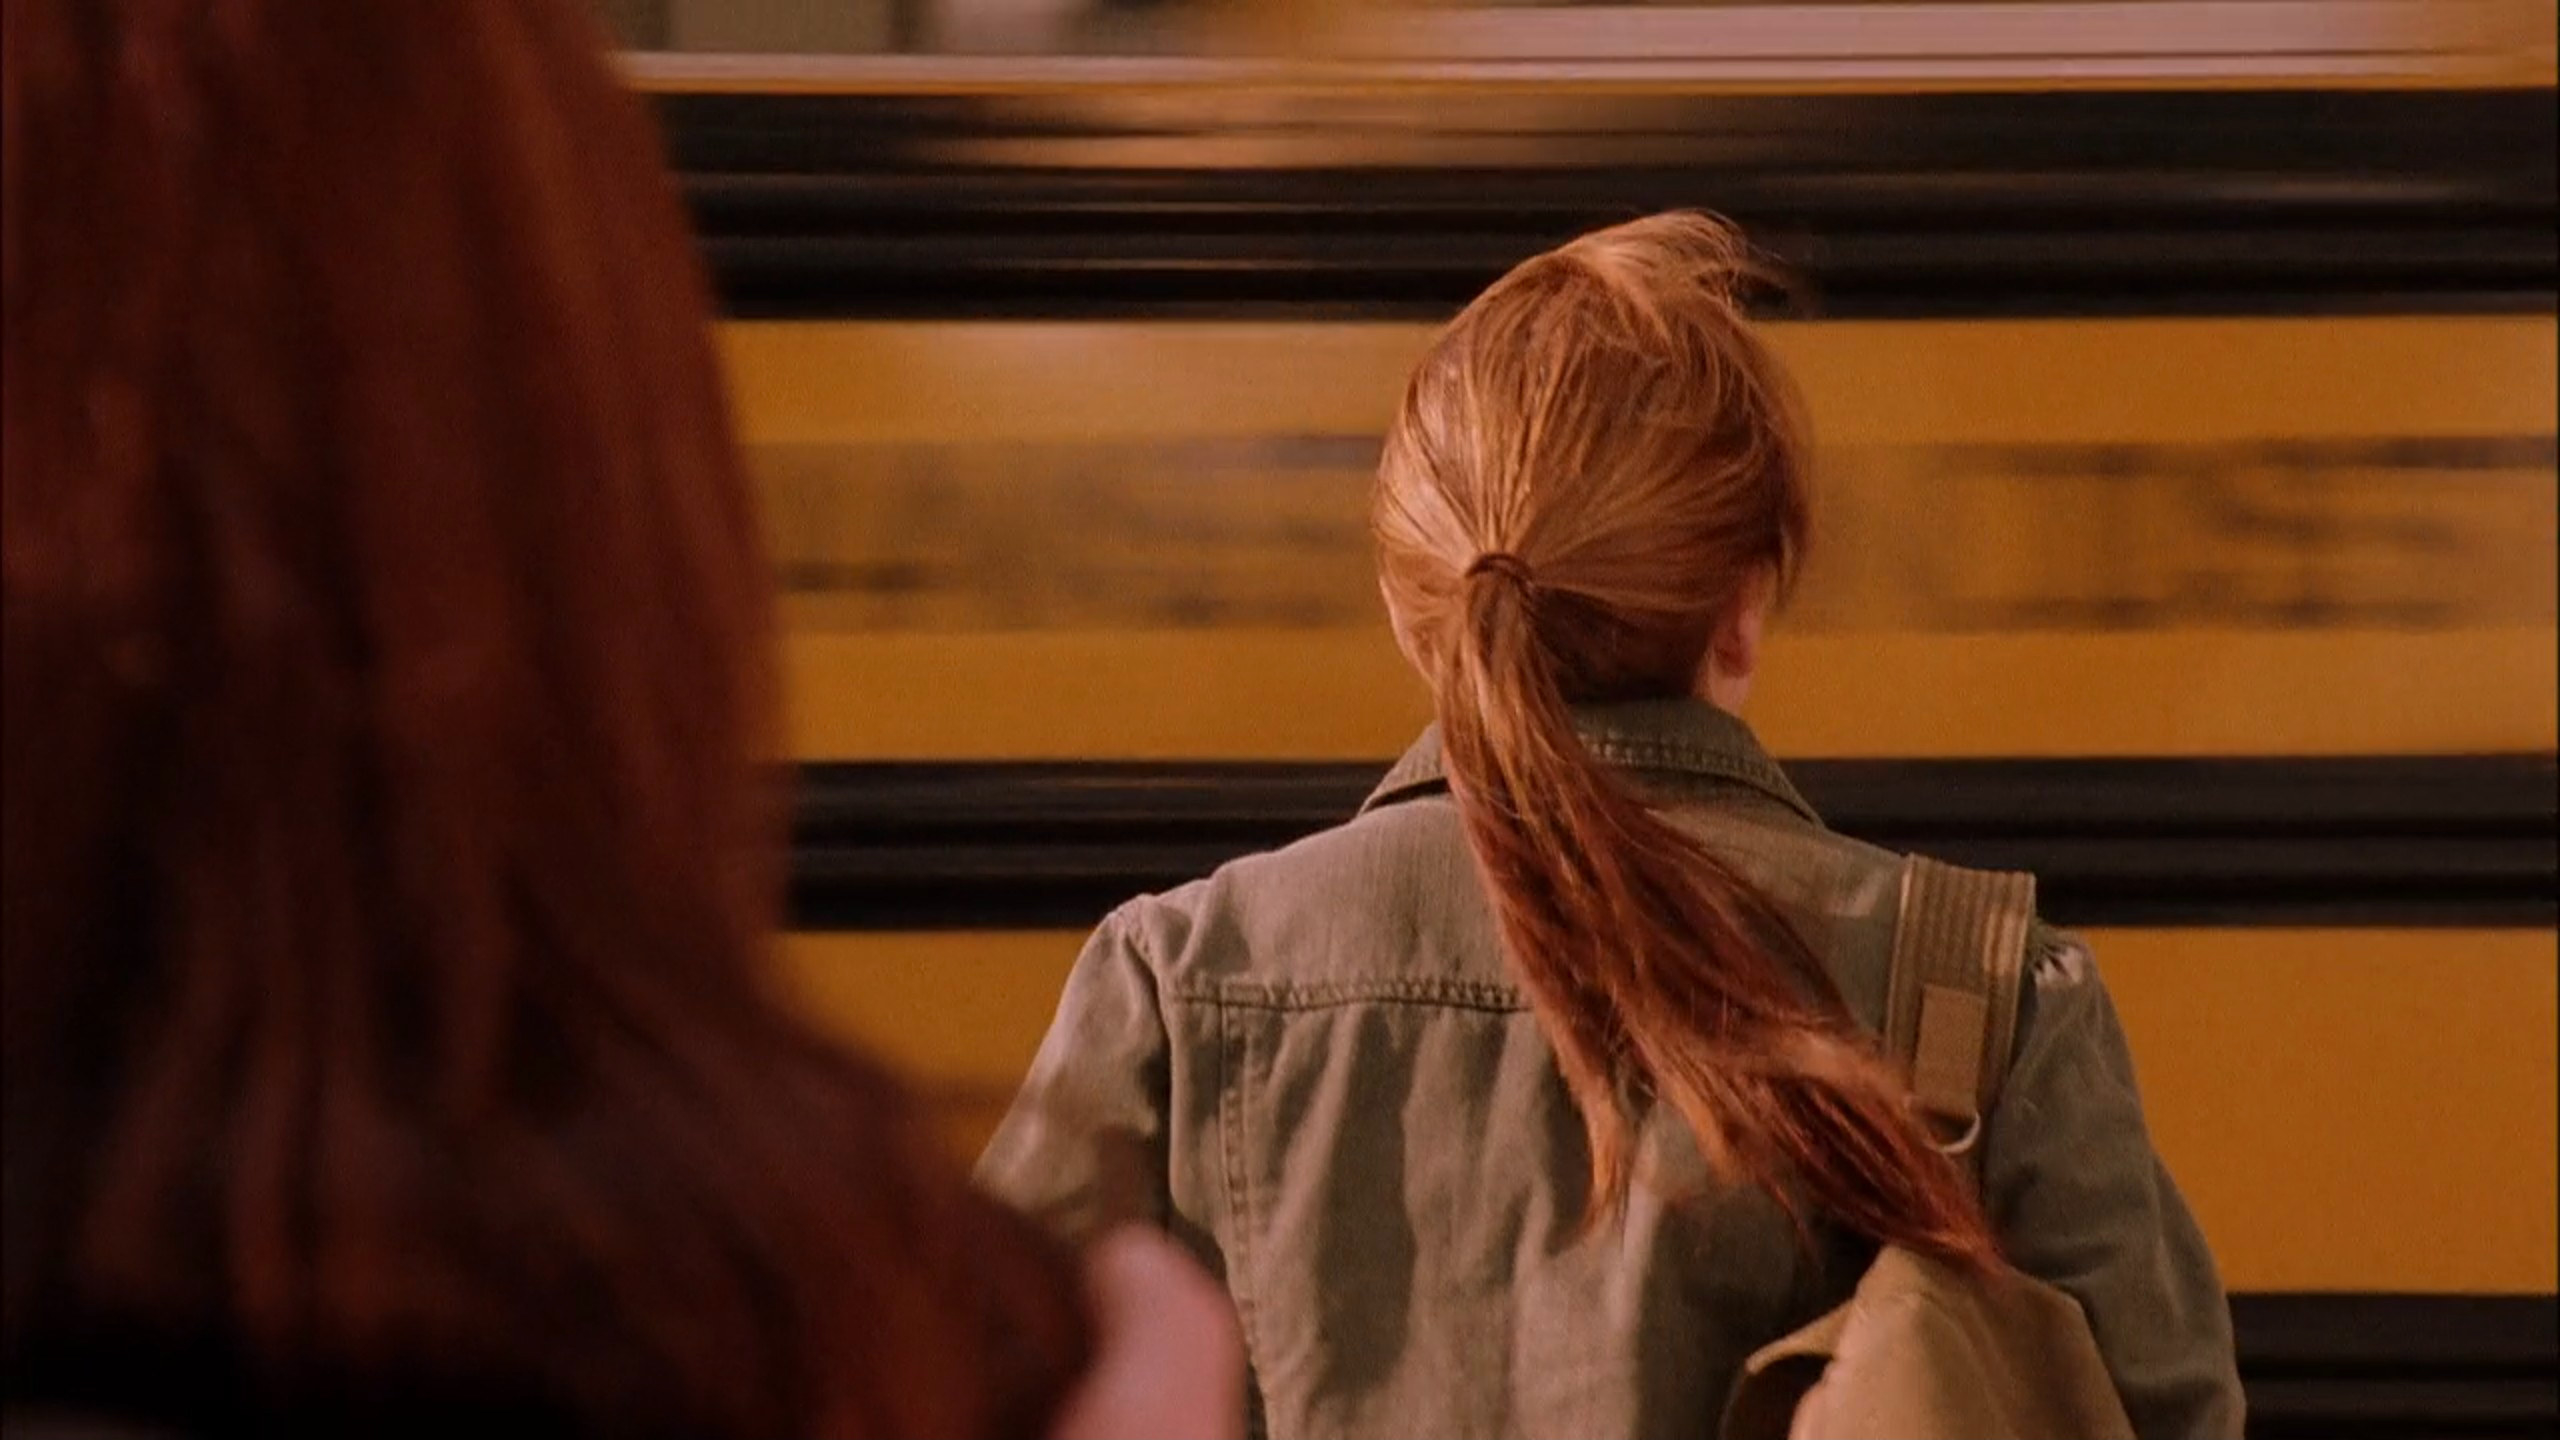 lindsay lohan in &quot;mean girls&quot; almost gets hit by a bus